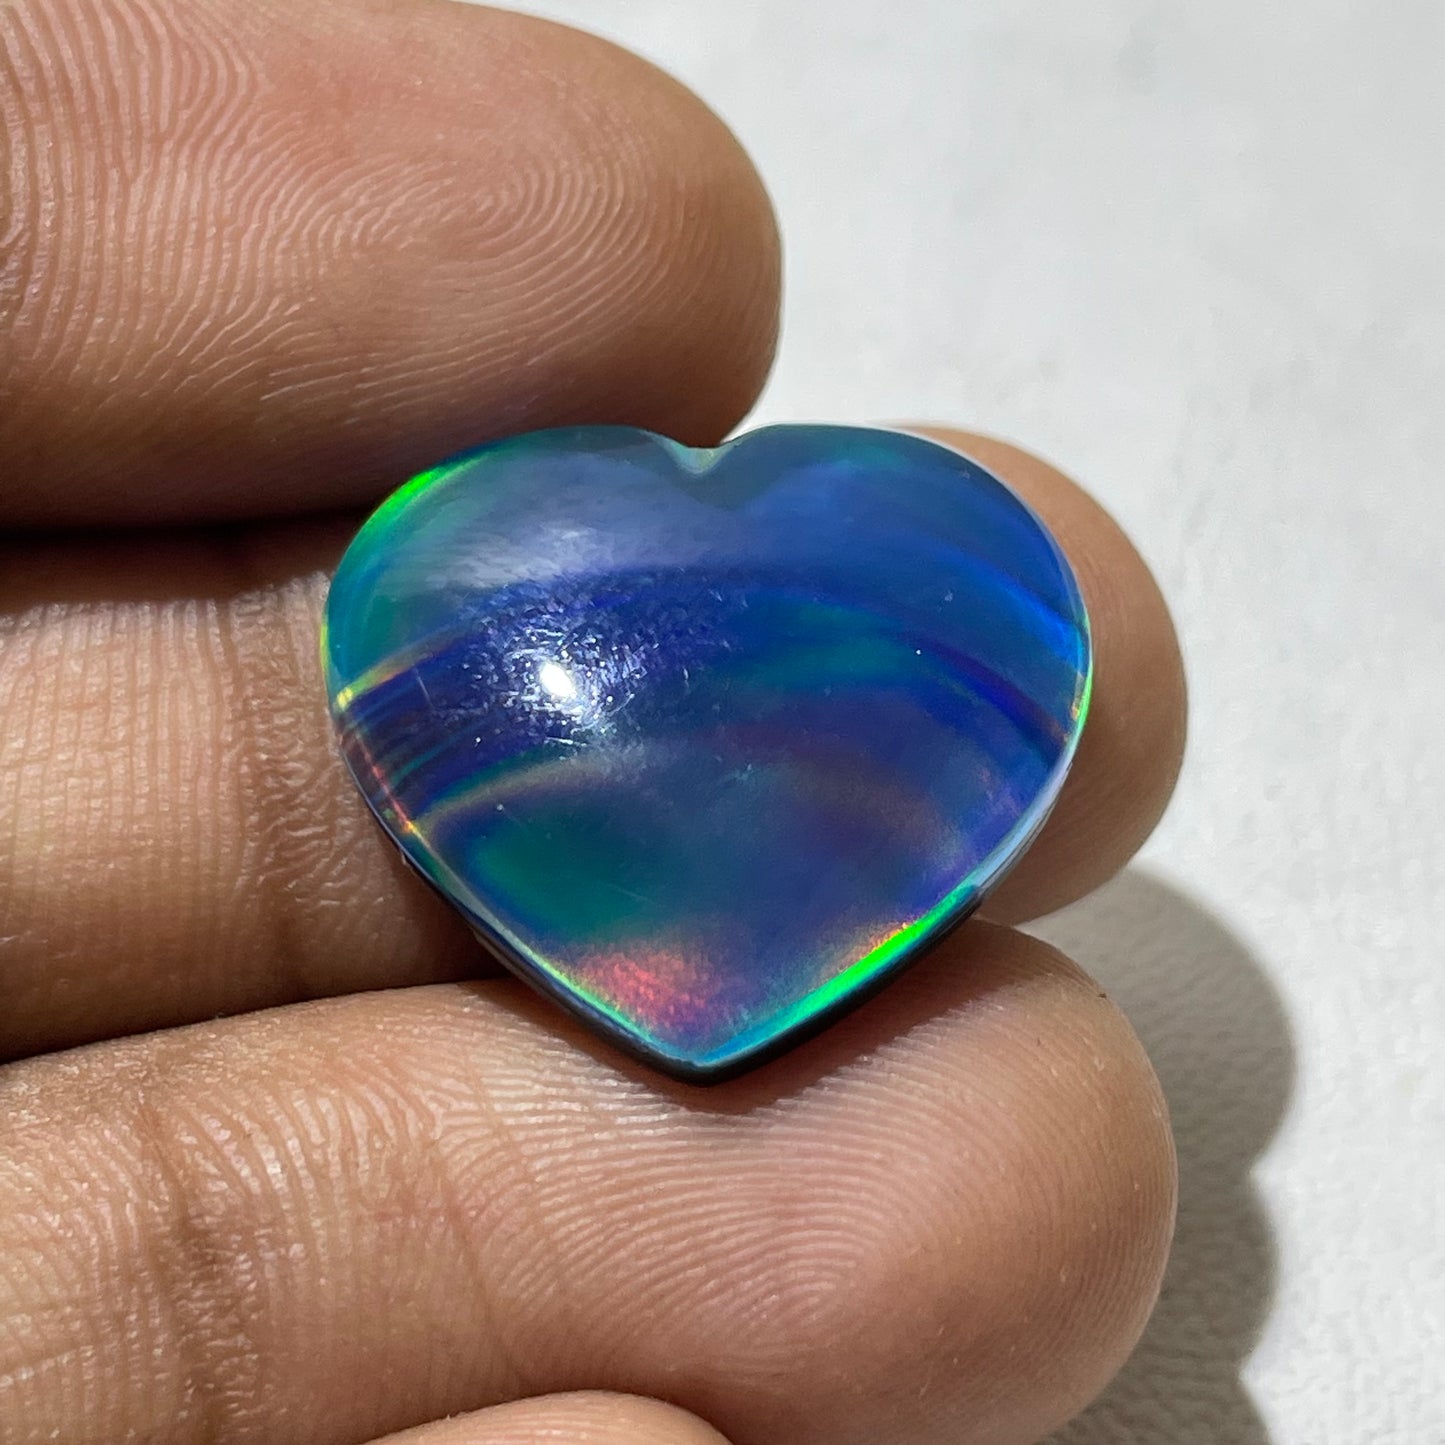 Australian opal Doubled Cabochon (Lab-Created)